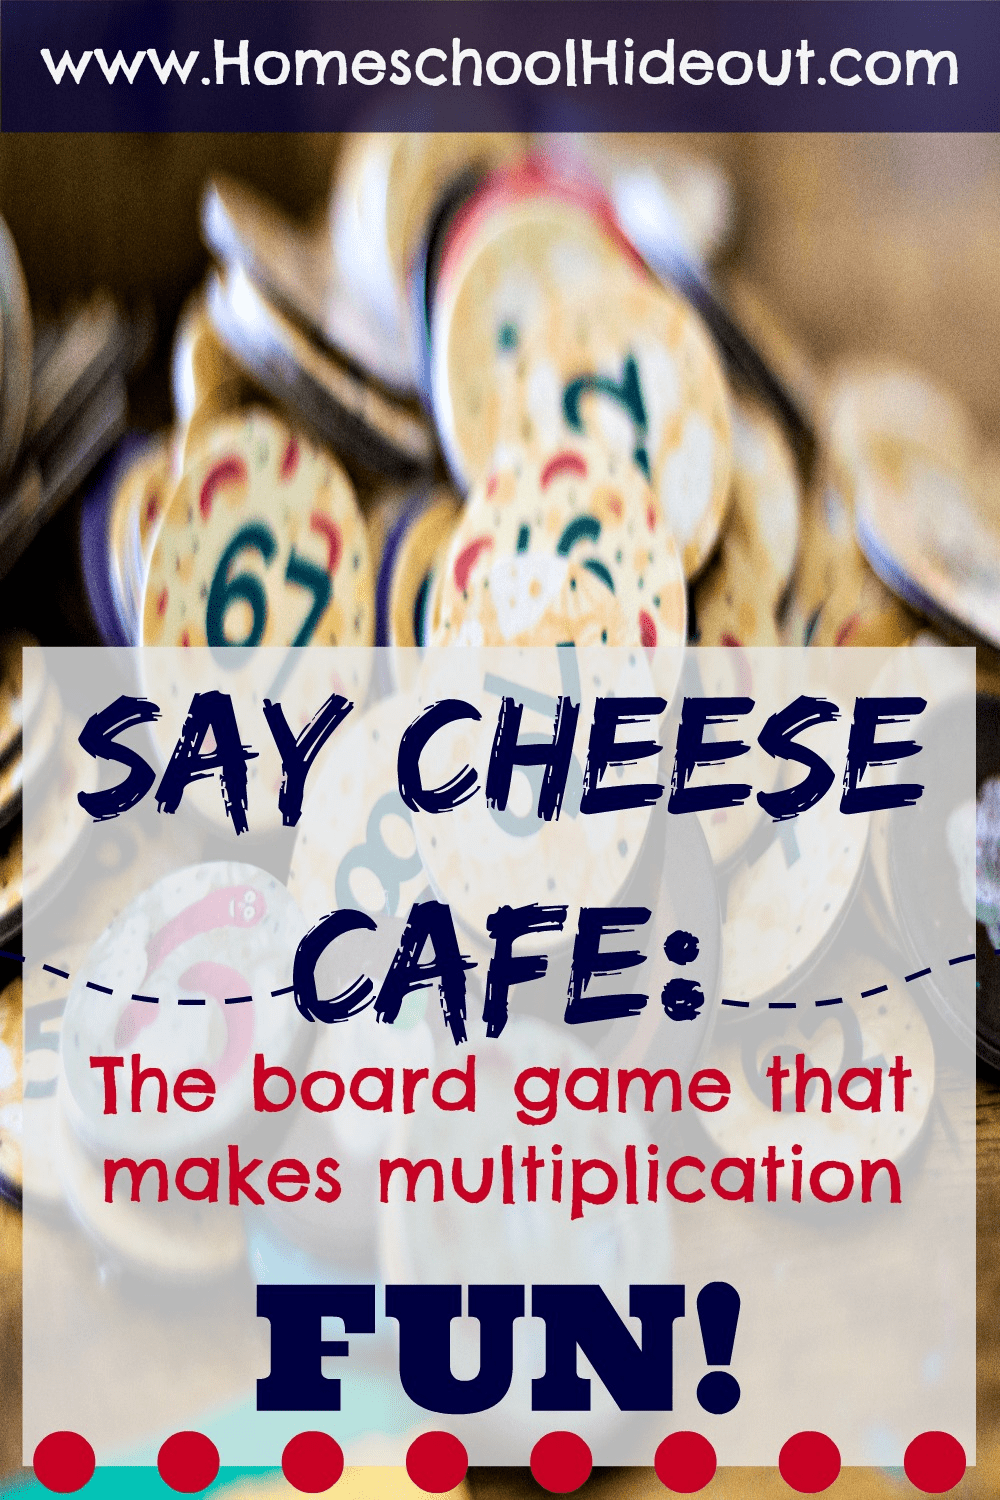 I am obsessed with this game, Say Cheese Cafe! It really drives home the multiplication facts like nothing we've tried before!